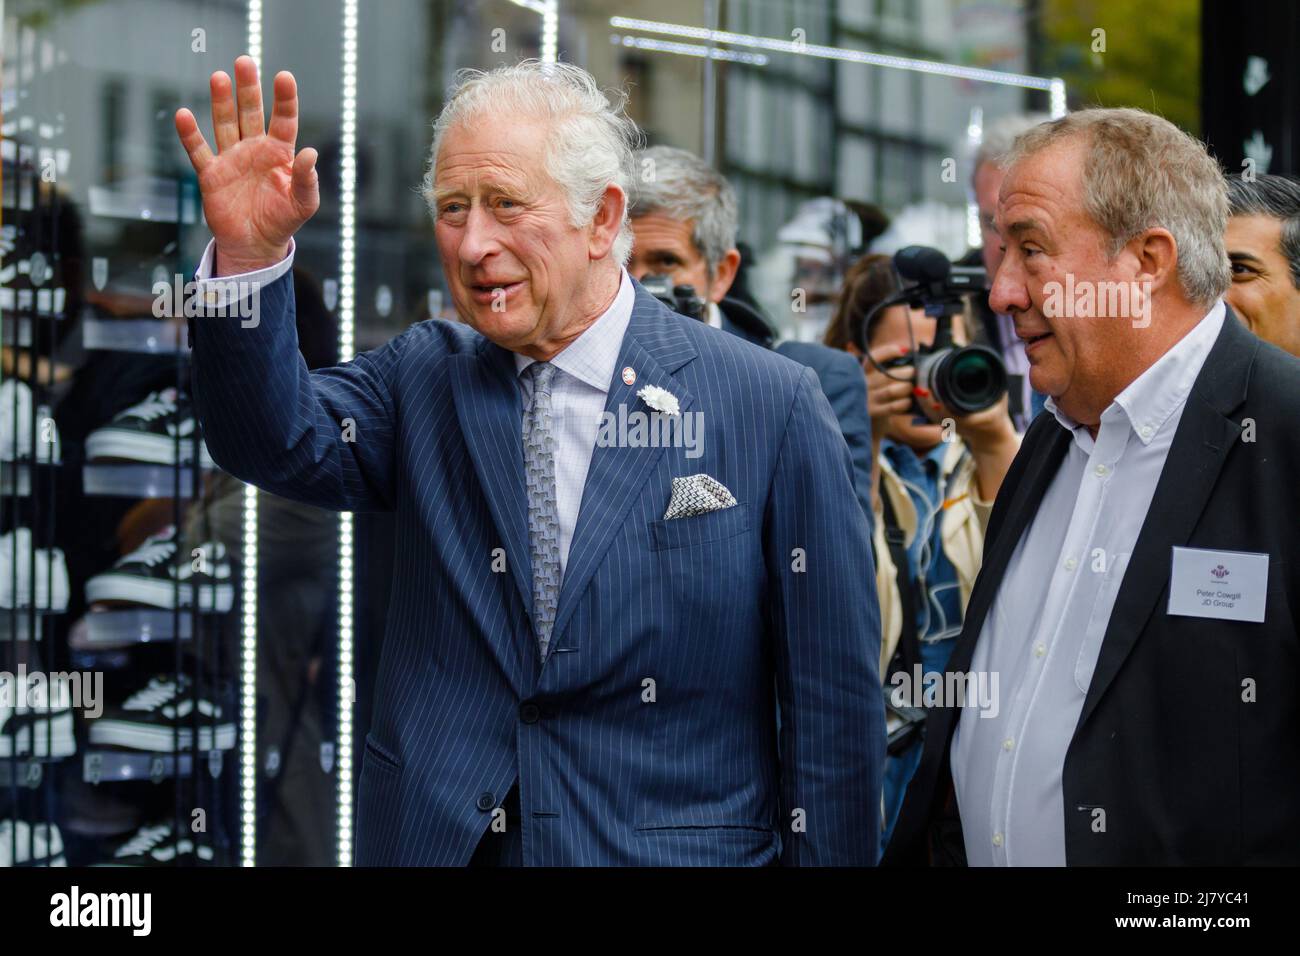 Walworth, London, UK. 11th May 2022,HRH Prince Charles, The Prince of Wales, Founder and President of The Prince’s Trust, beside Peter Cowhill of the JD Group, waves to wellwishers  during his visit to The Prince’s Trust Kickstart supported young peopleat JD Sports. Amanda Rose/Alamy Live News Stock Photo